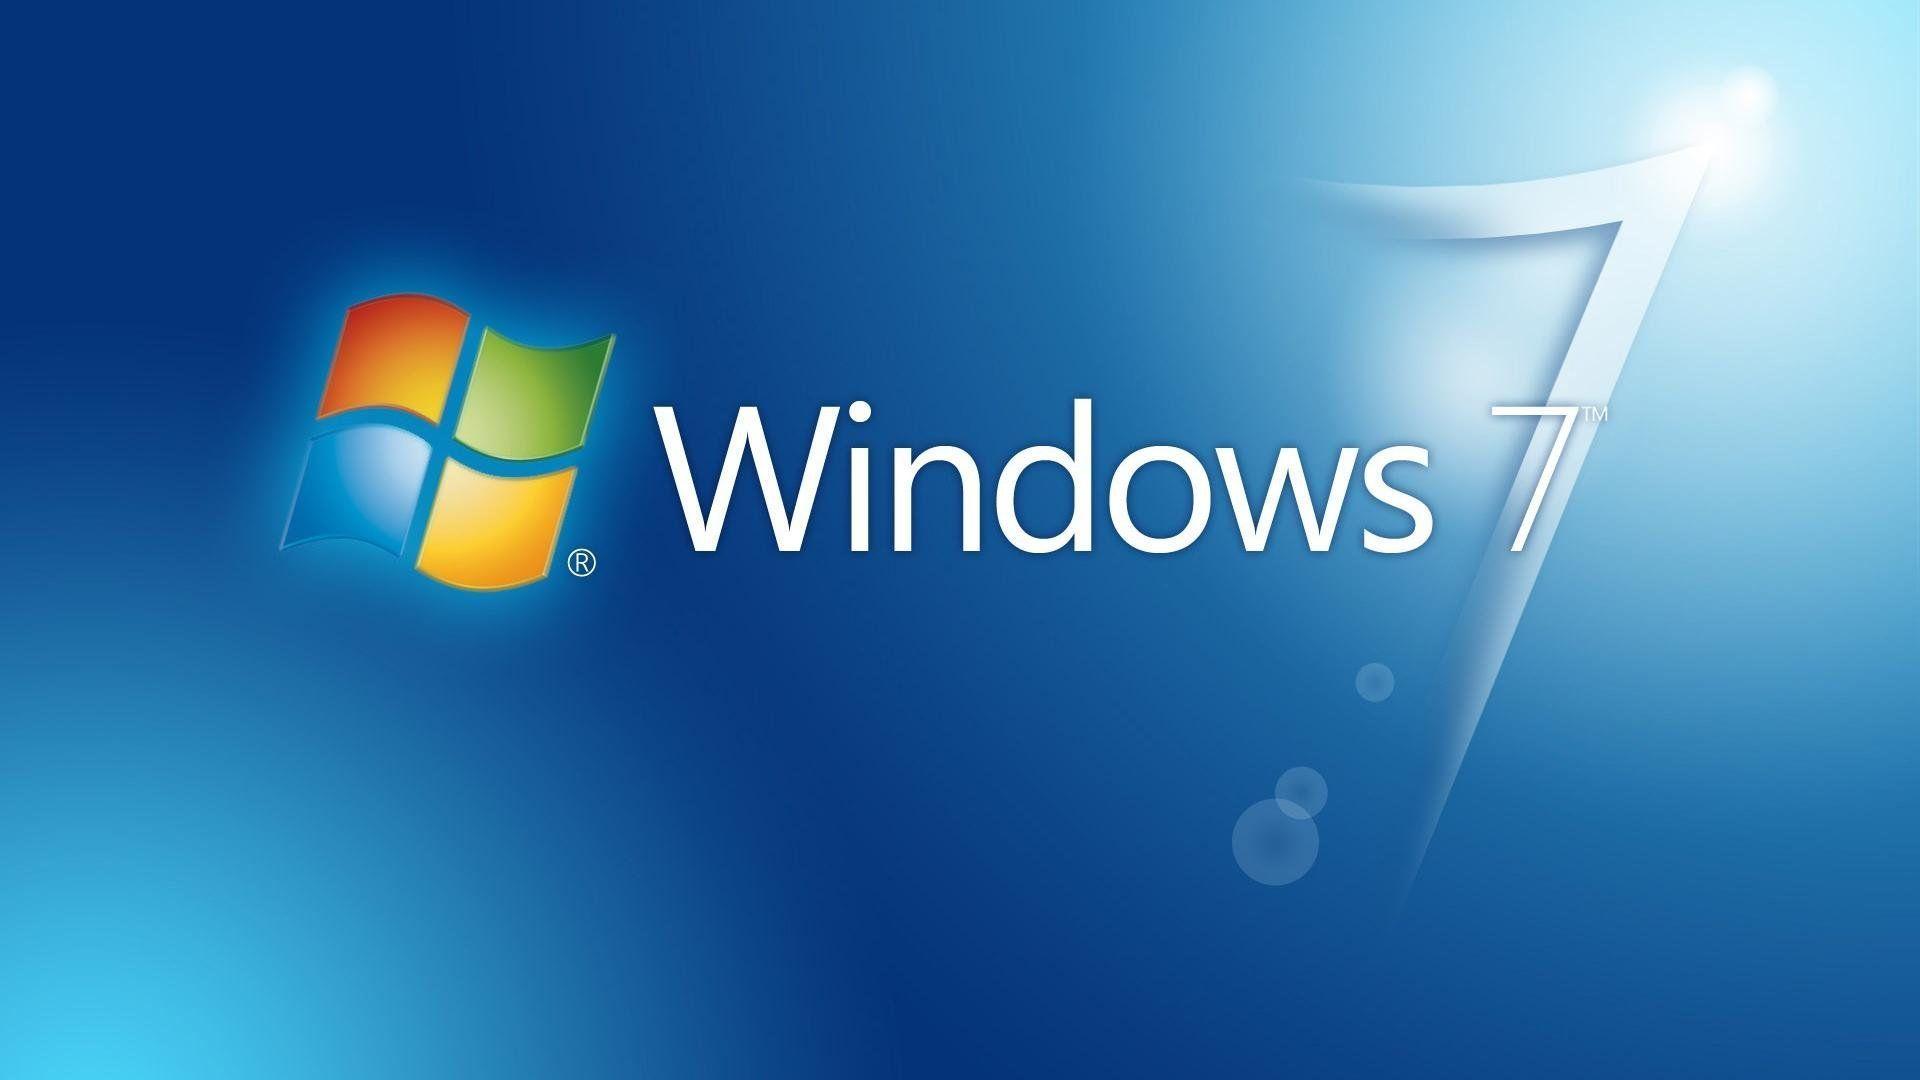 Windows HD Image Wallpaper Collection